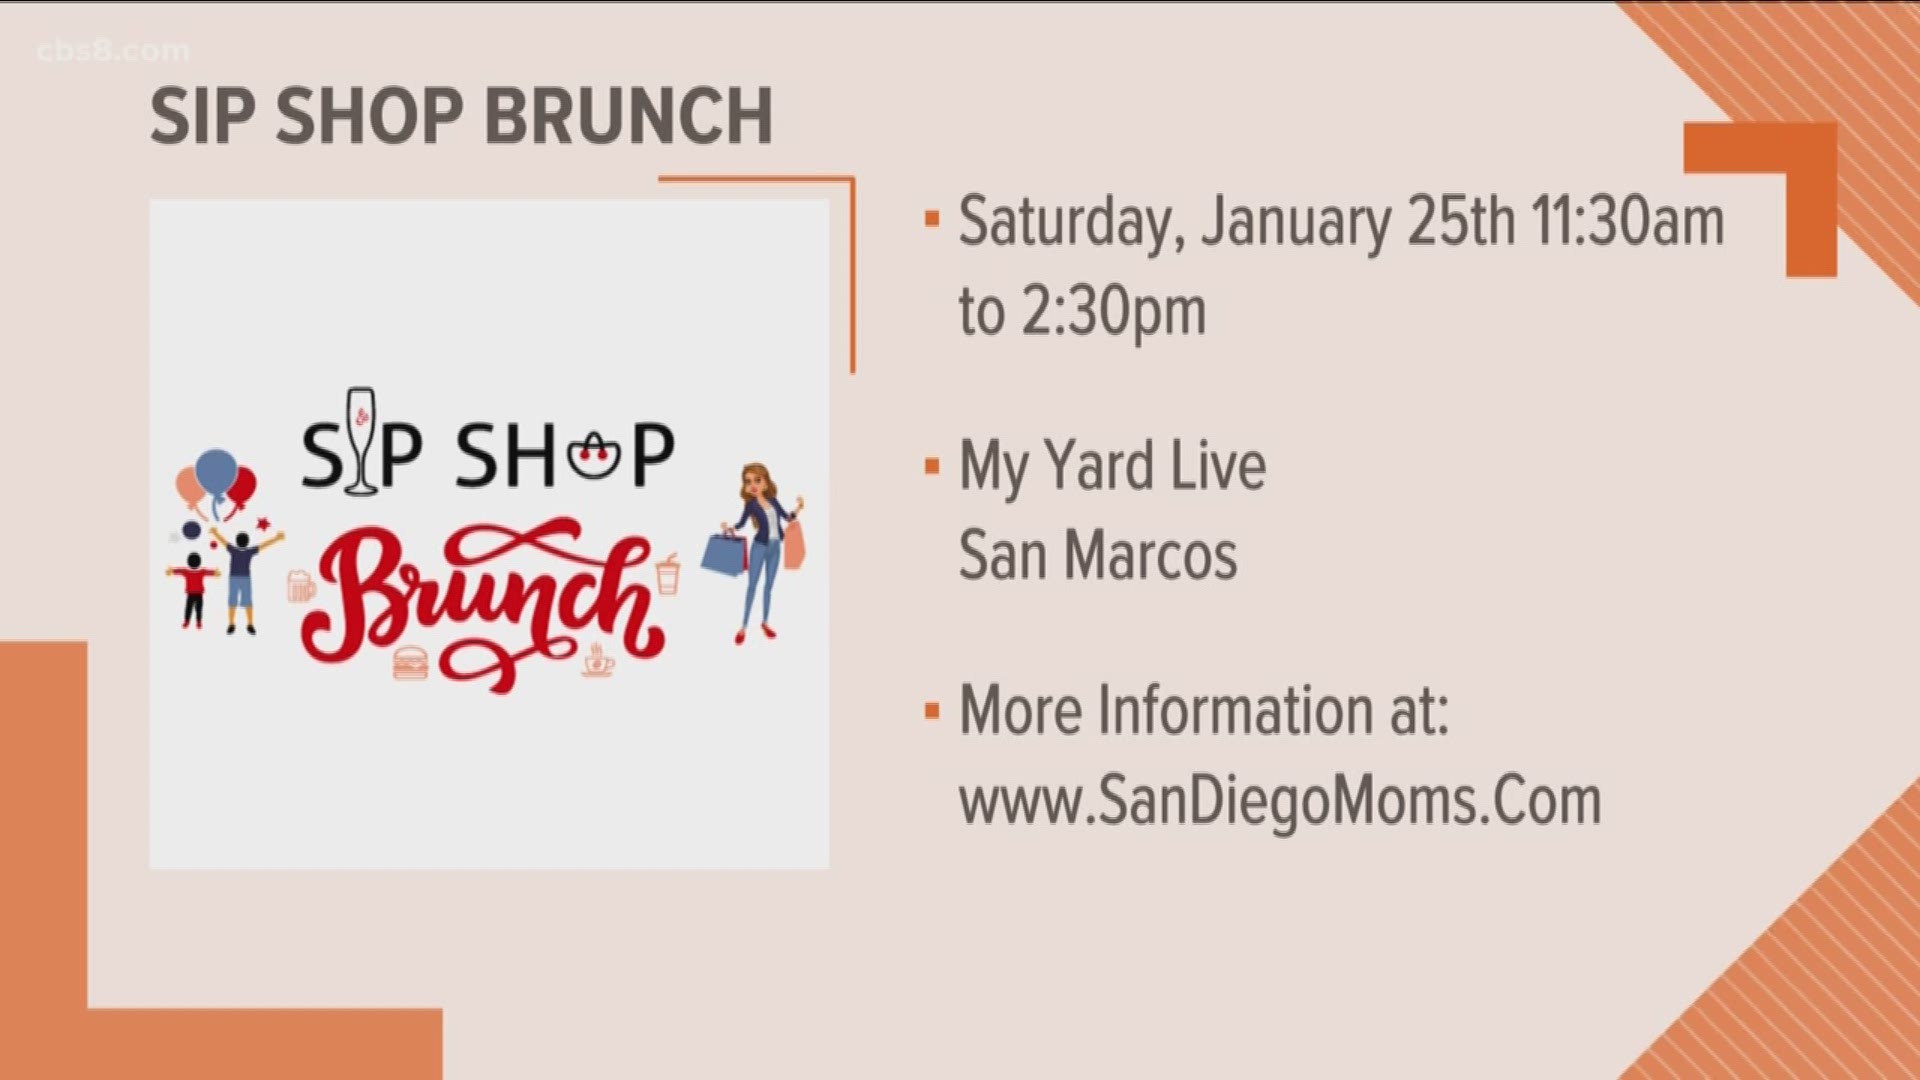 This Saturday you can Sip, Shop, Brunch and support mom businesses.